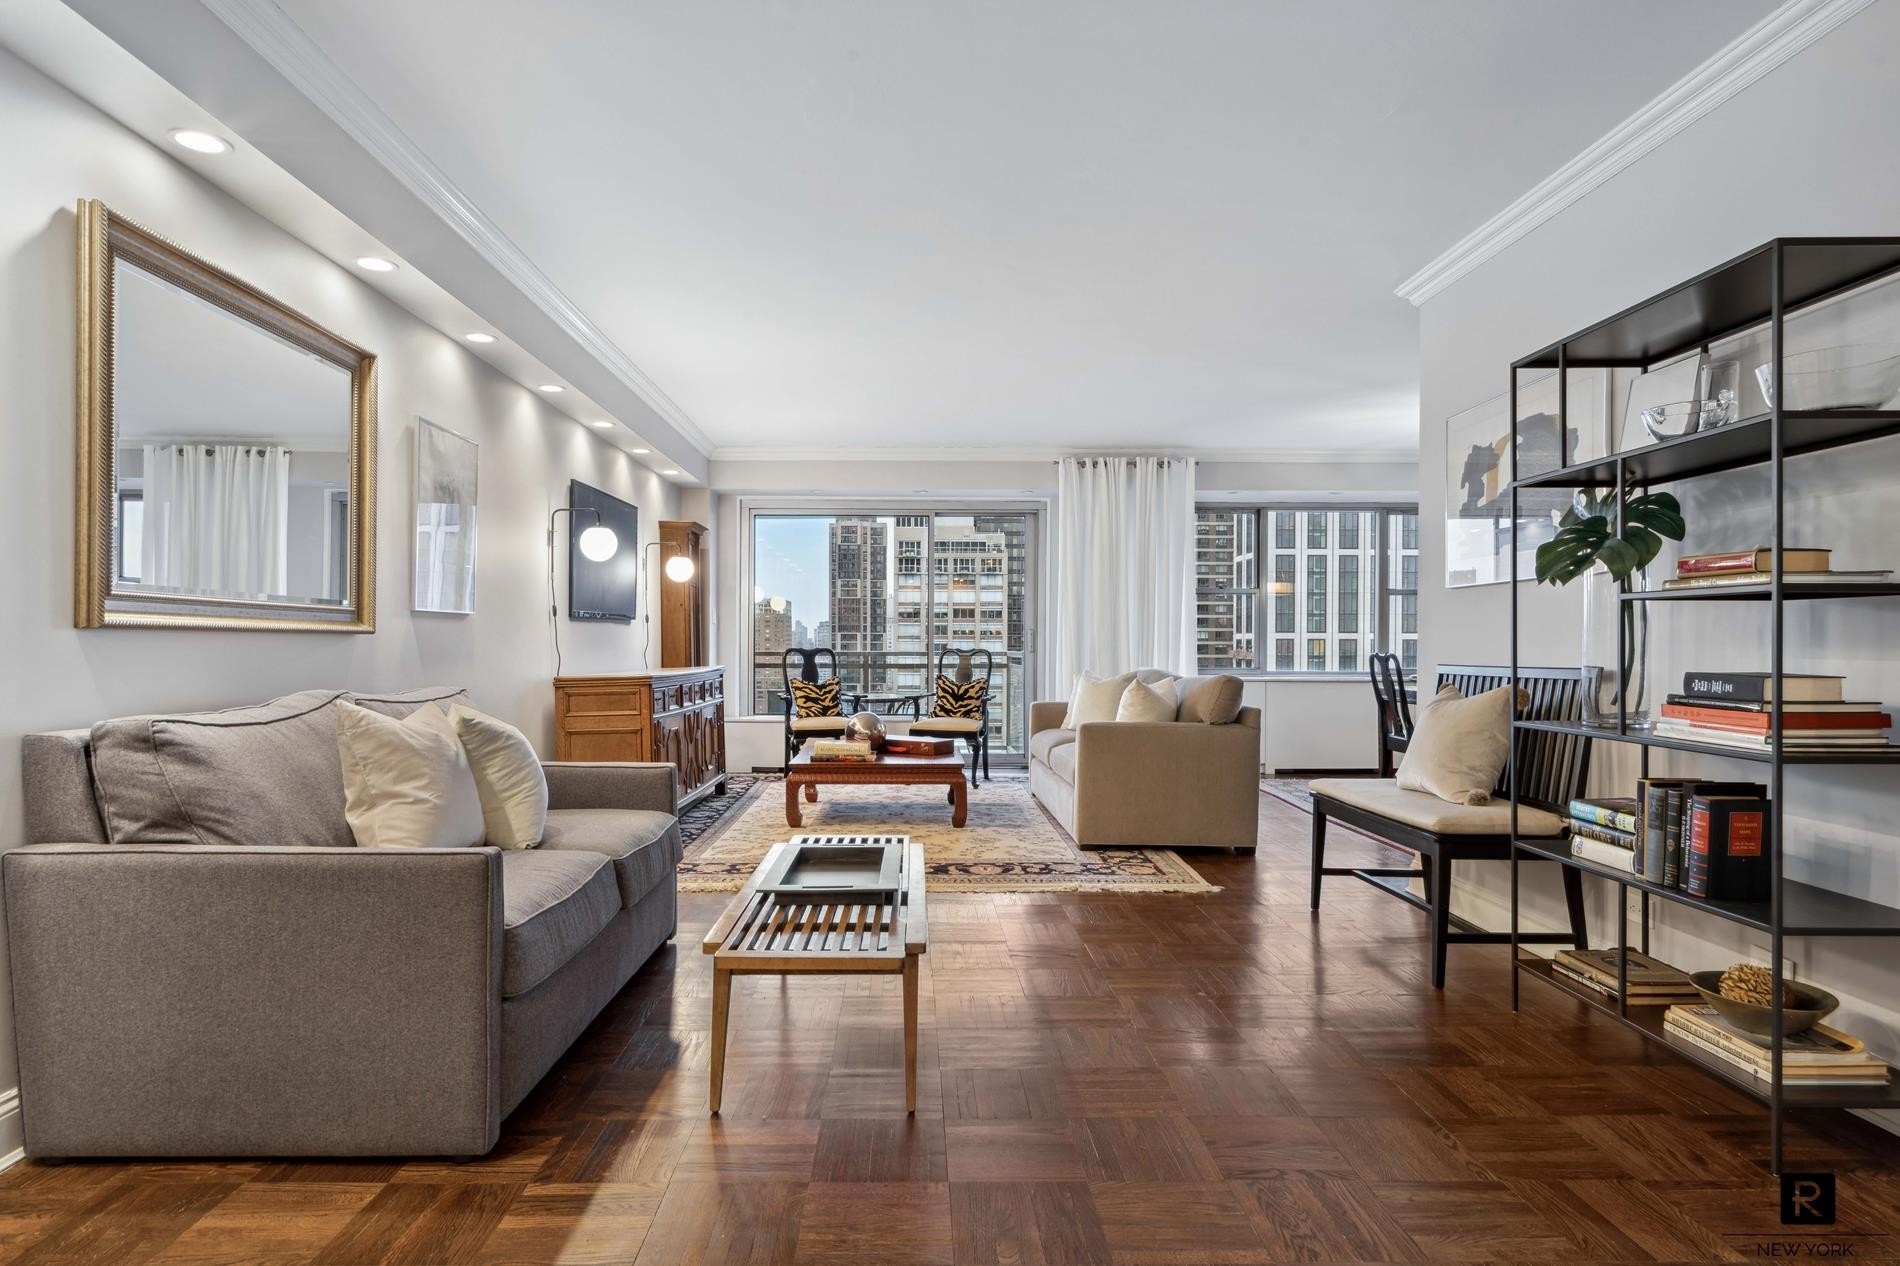 Co-op Properties for Sale at Plaza 400, 400 E 56TH ST, 29H Sutton Place, New York, New York 10022